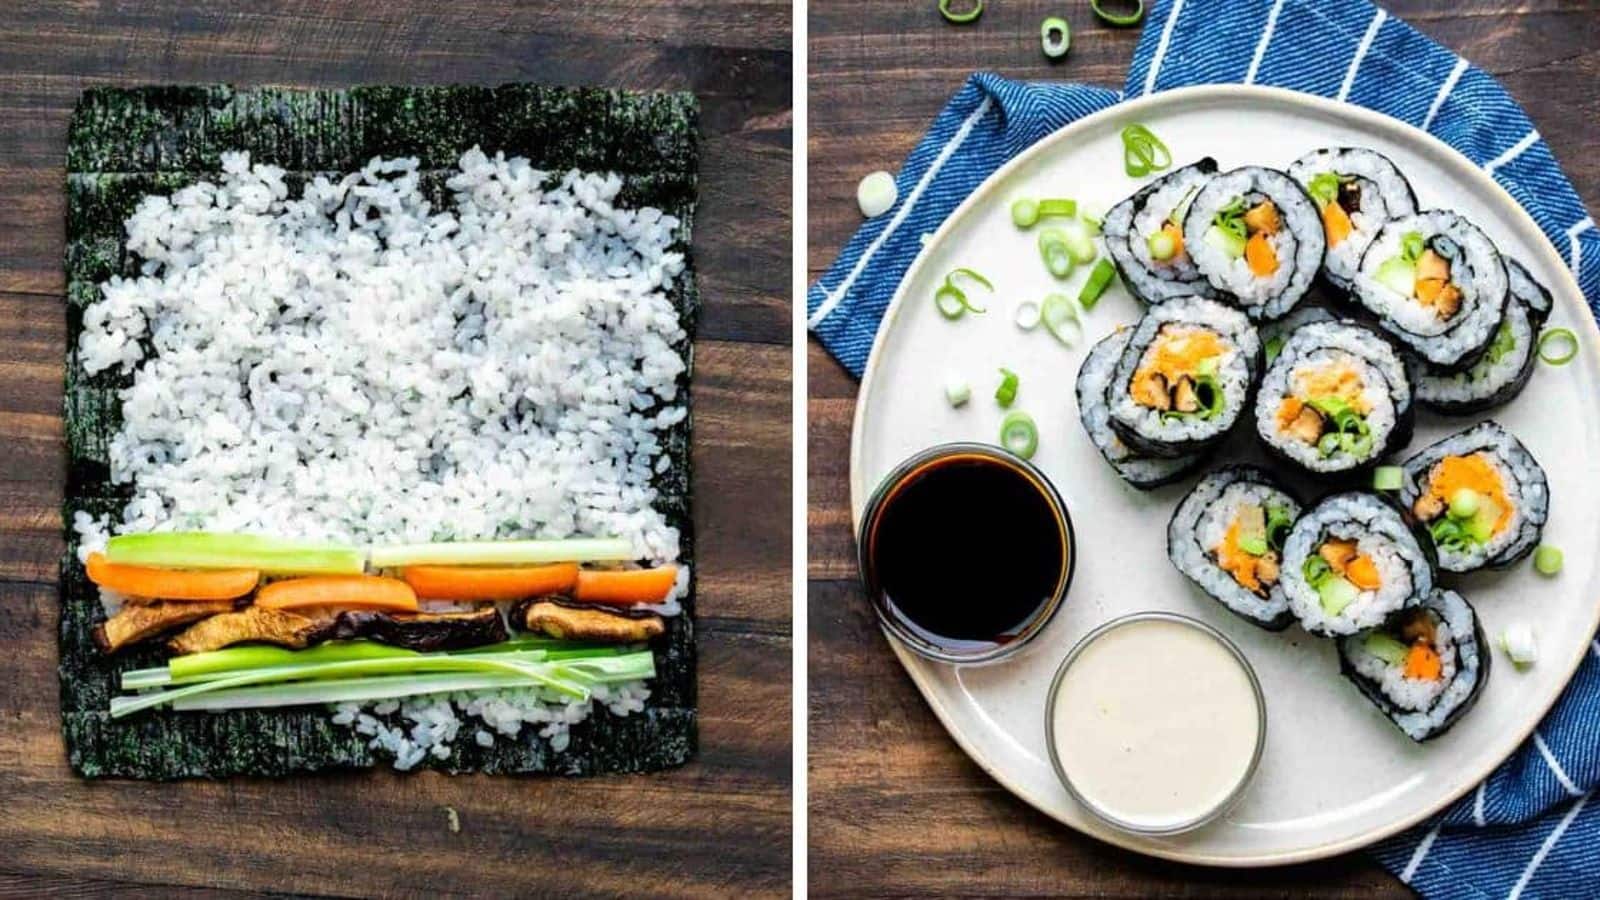 Try this sushi roll recipe for a flavorsome day